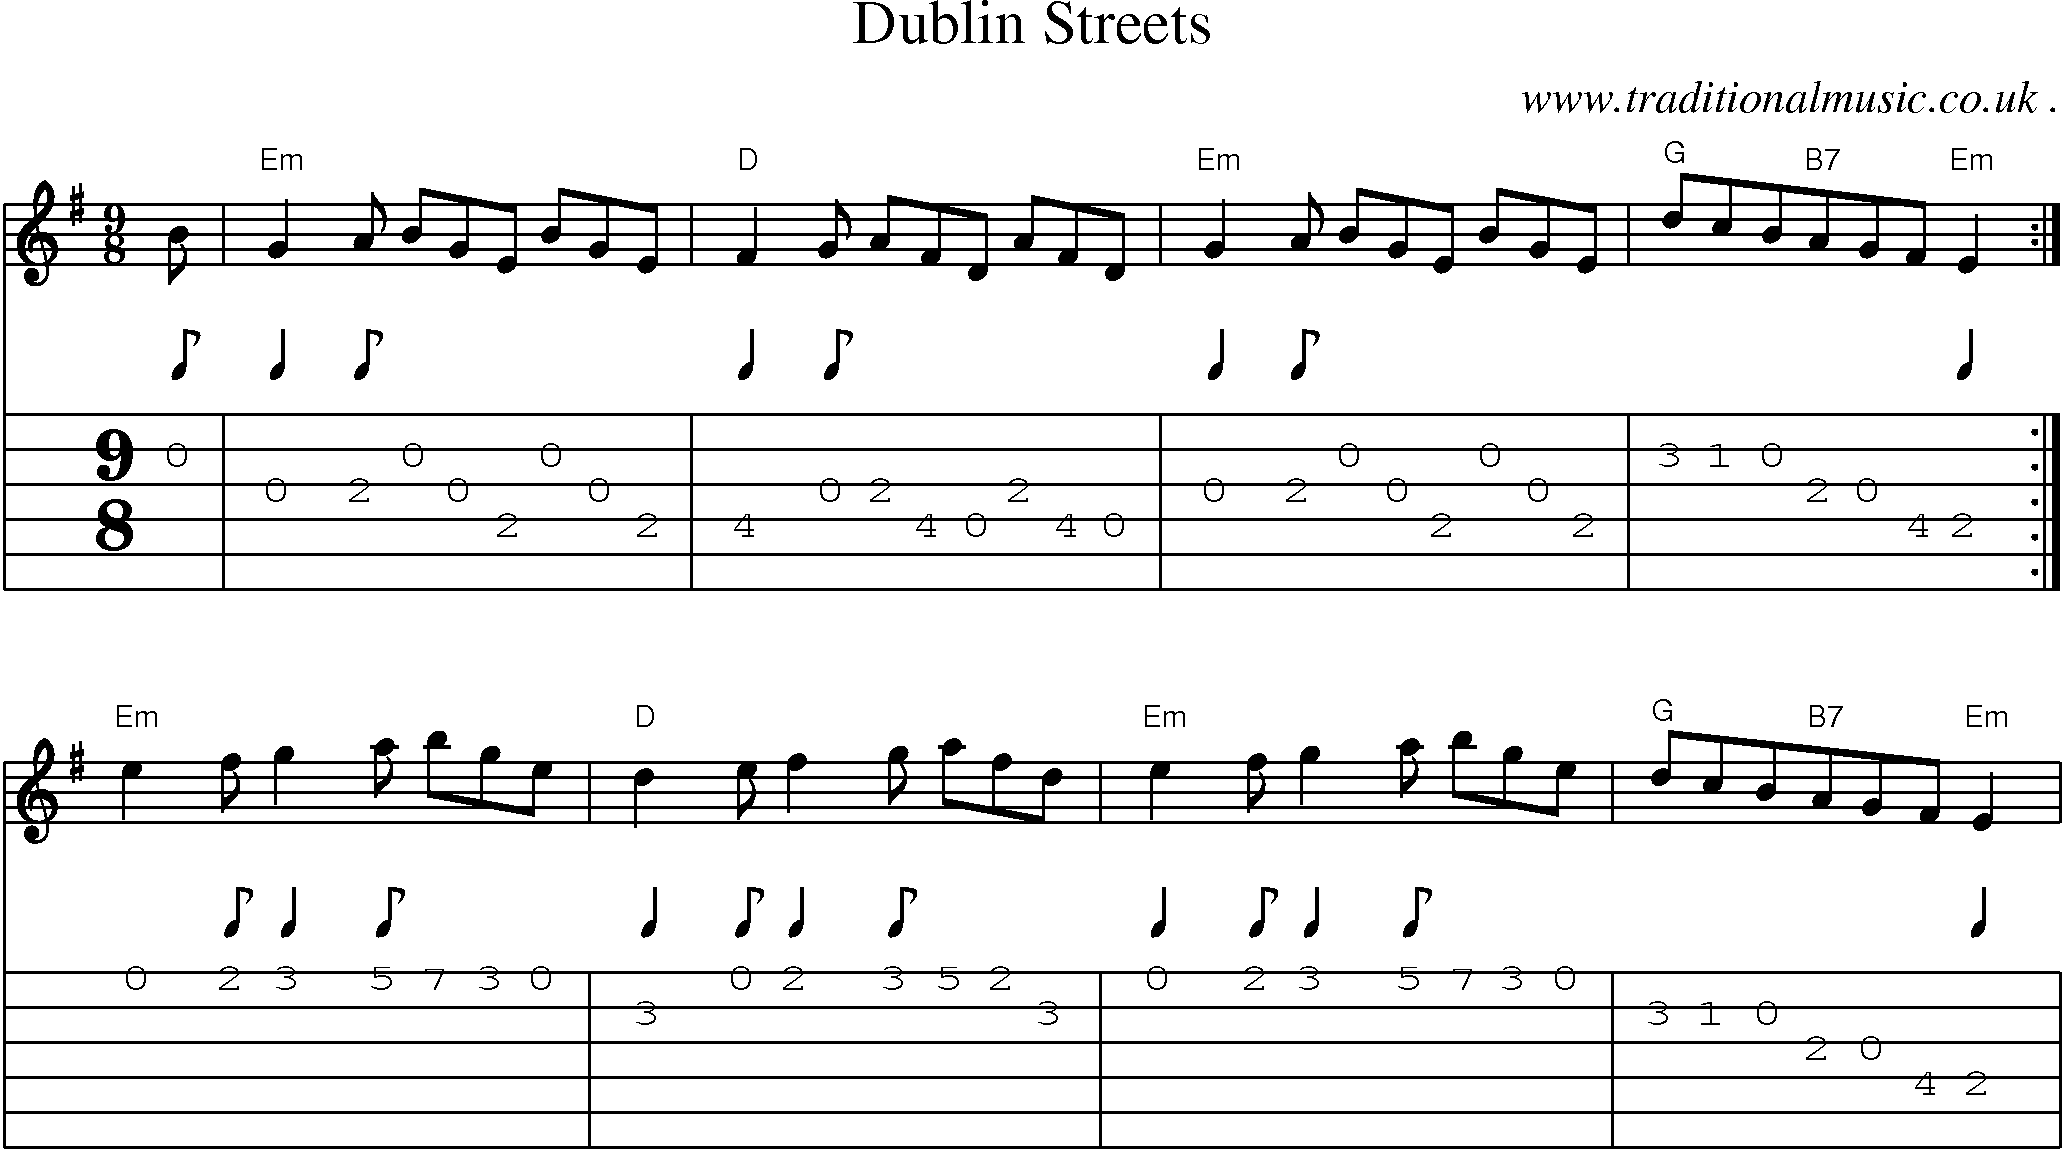 Sheet-Music and Guitar Tabs for Dublin Streets